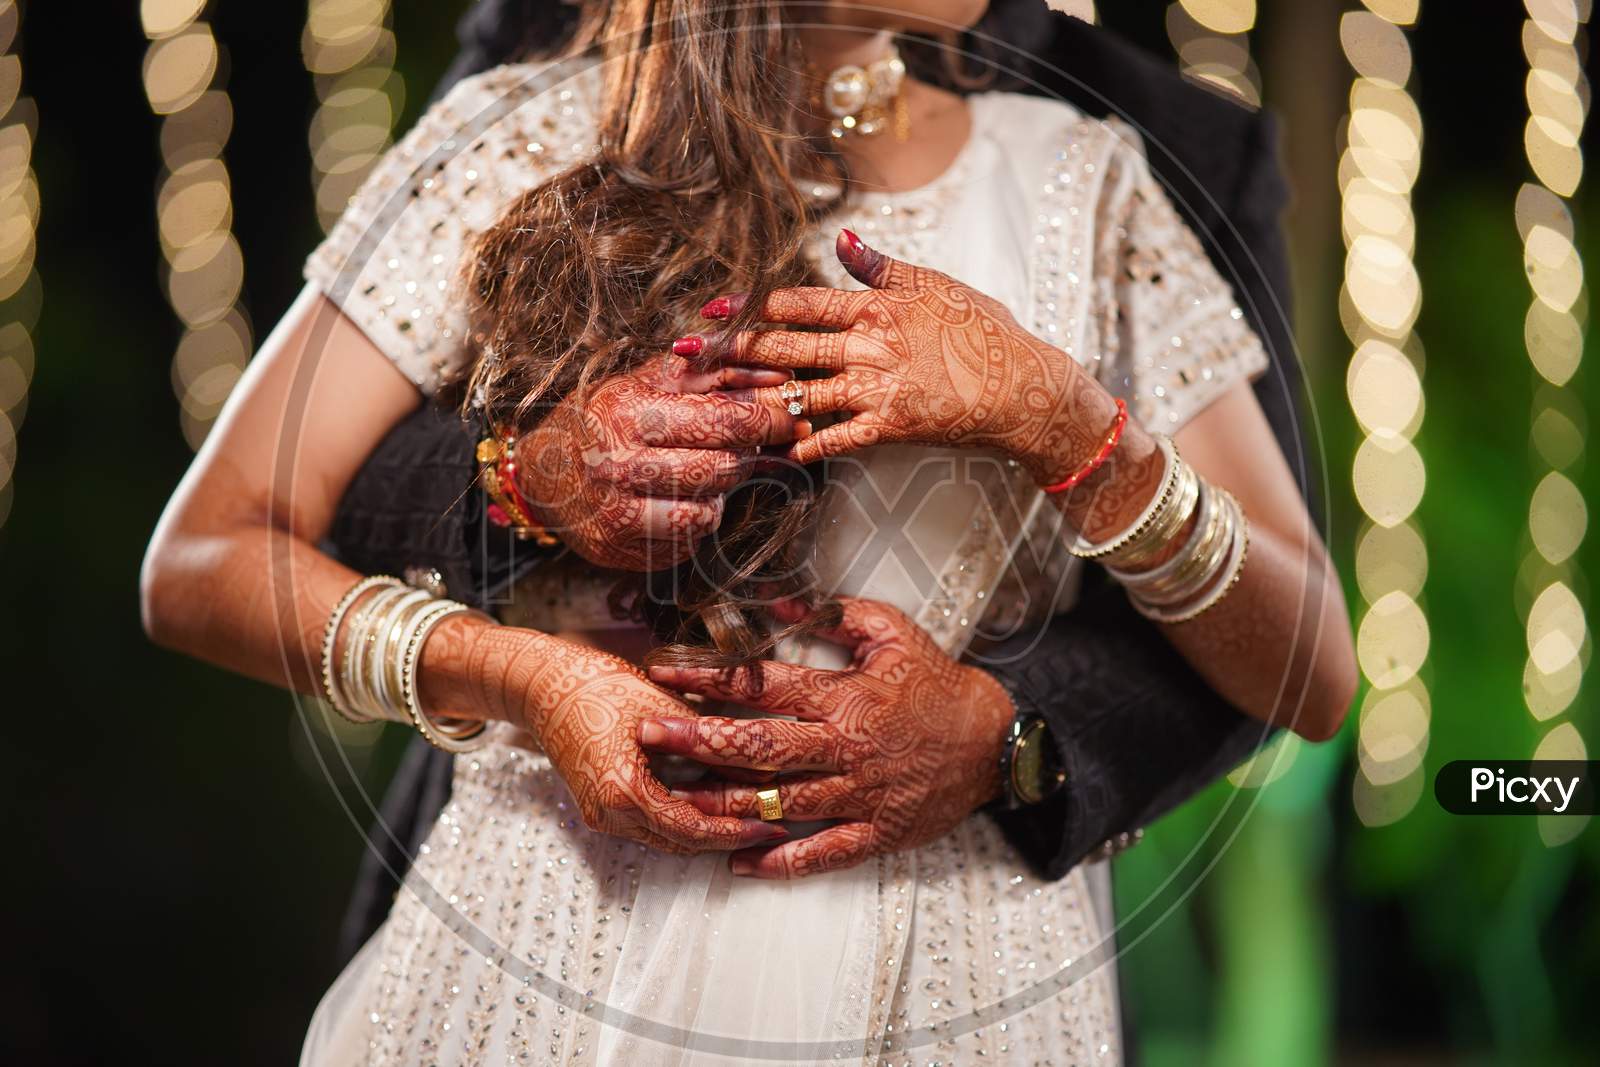 Photo of the couple posing and holding each other's fingers and showing rings during the typical Indian engagement ceremony.